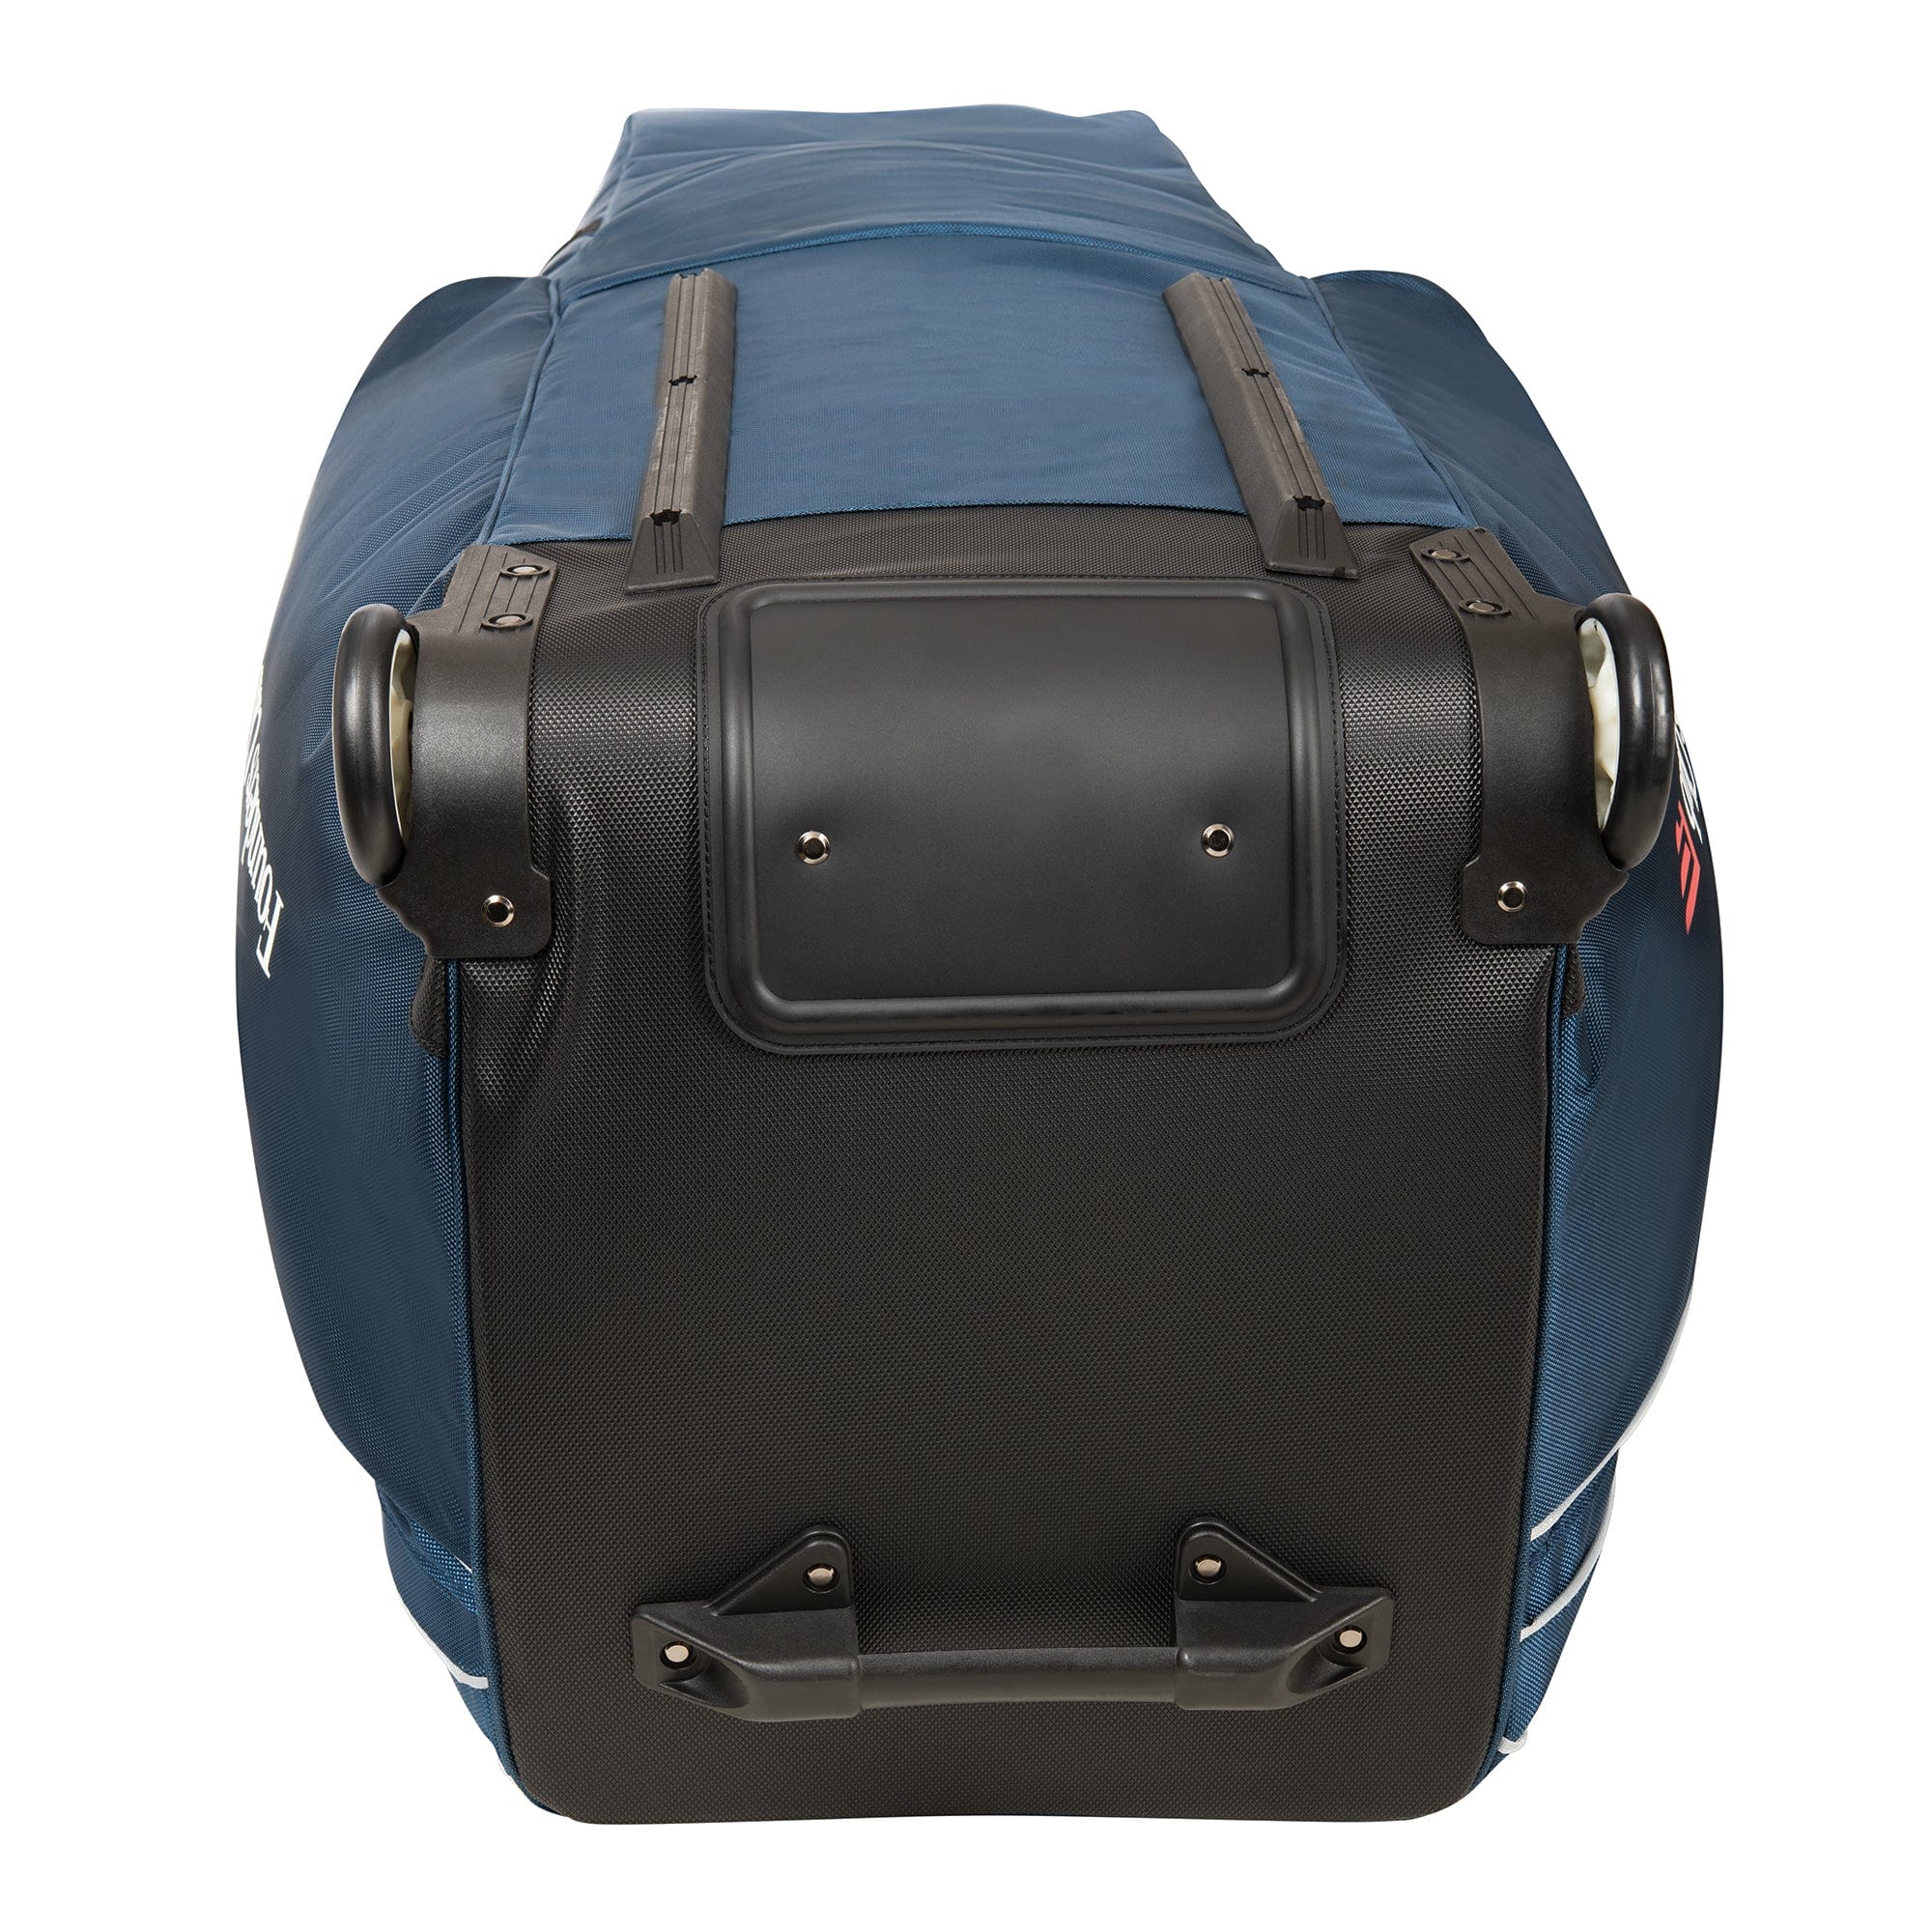 Urban Travel Luggage (Expandable) 60 L Medium travel bags men luggage, travel  bags travelling bags with wheels Duffel With Wheels (Strolley) MULTICOLOR -  Price in India | Flipkart.com